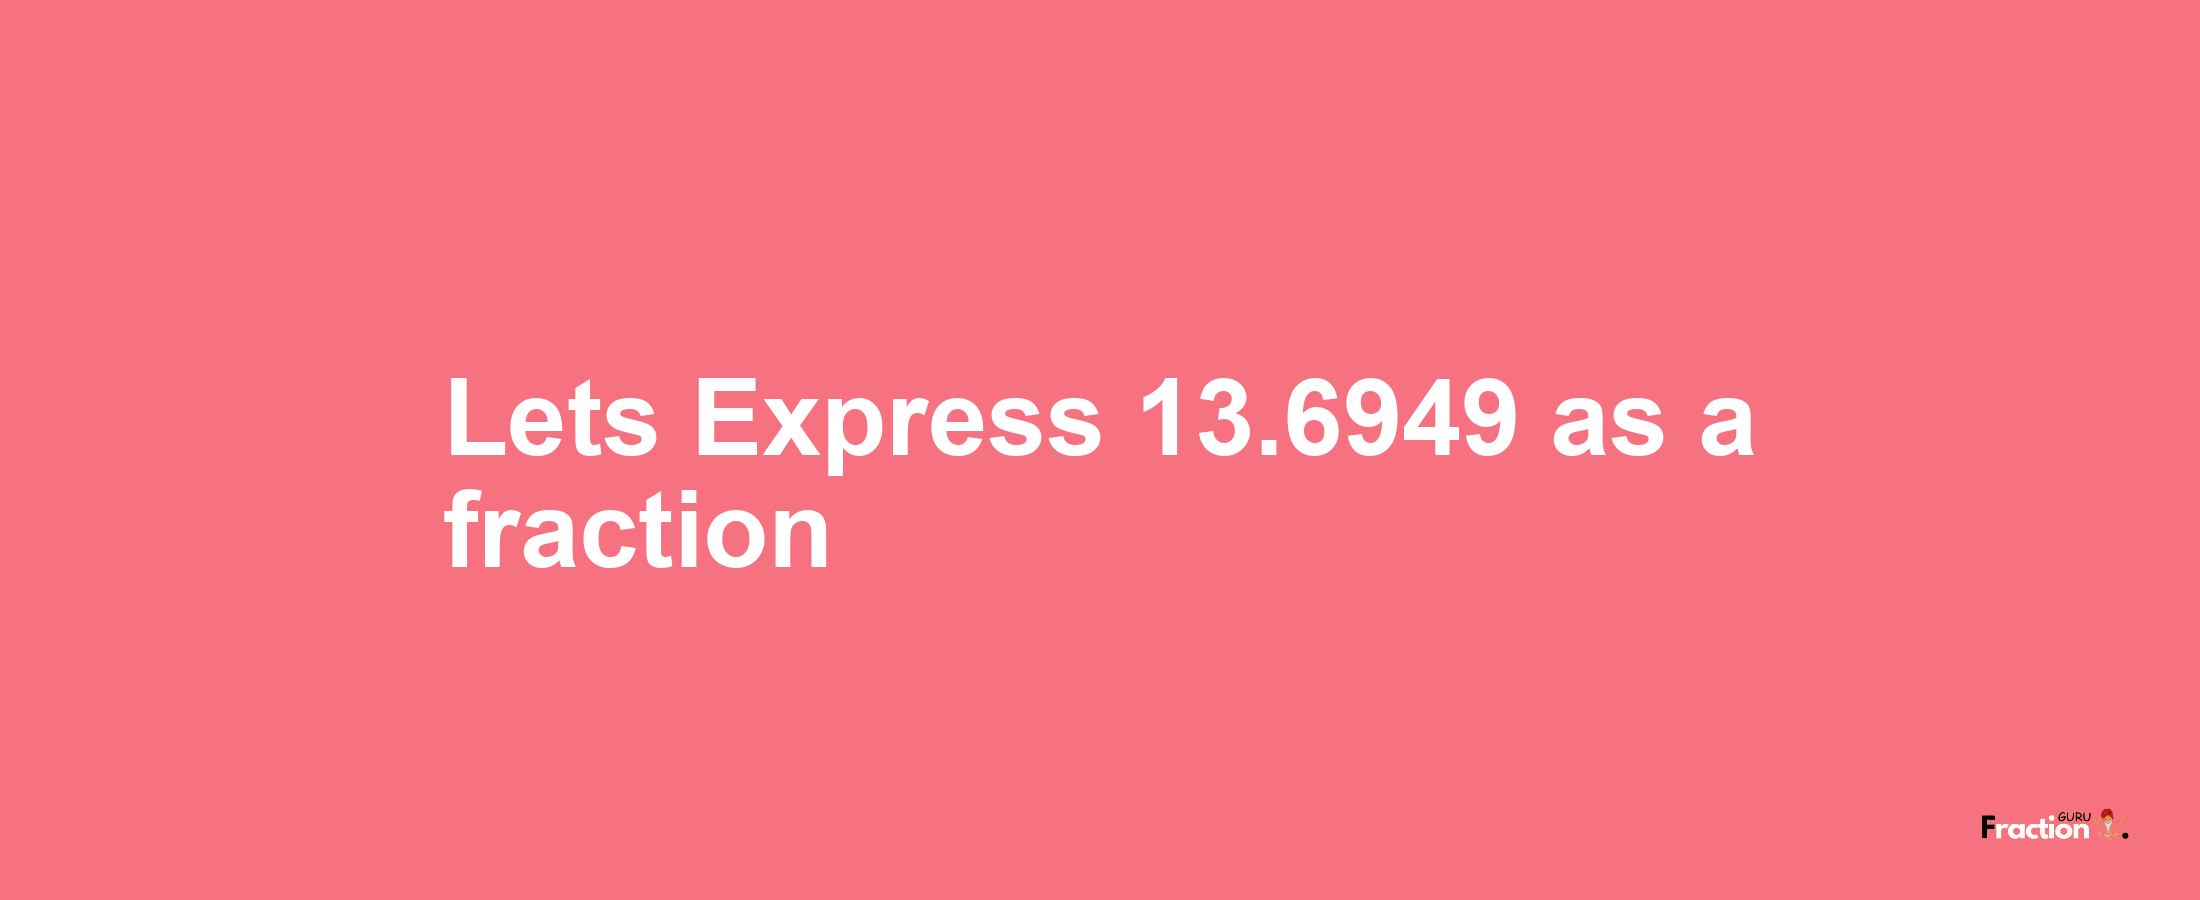 Lets Express 13.6949 as afraction